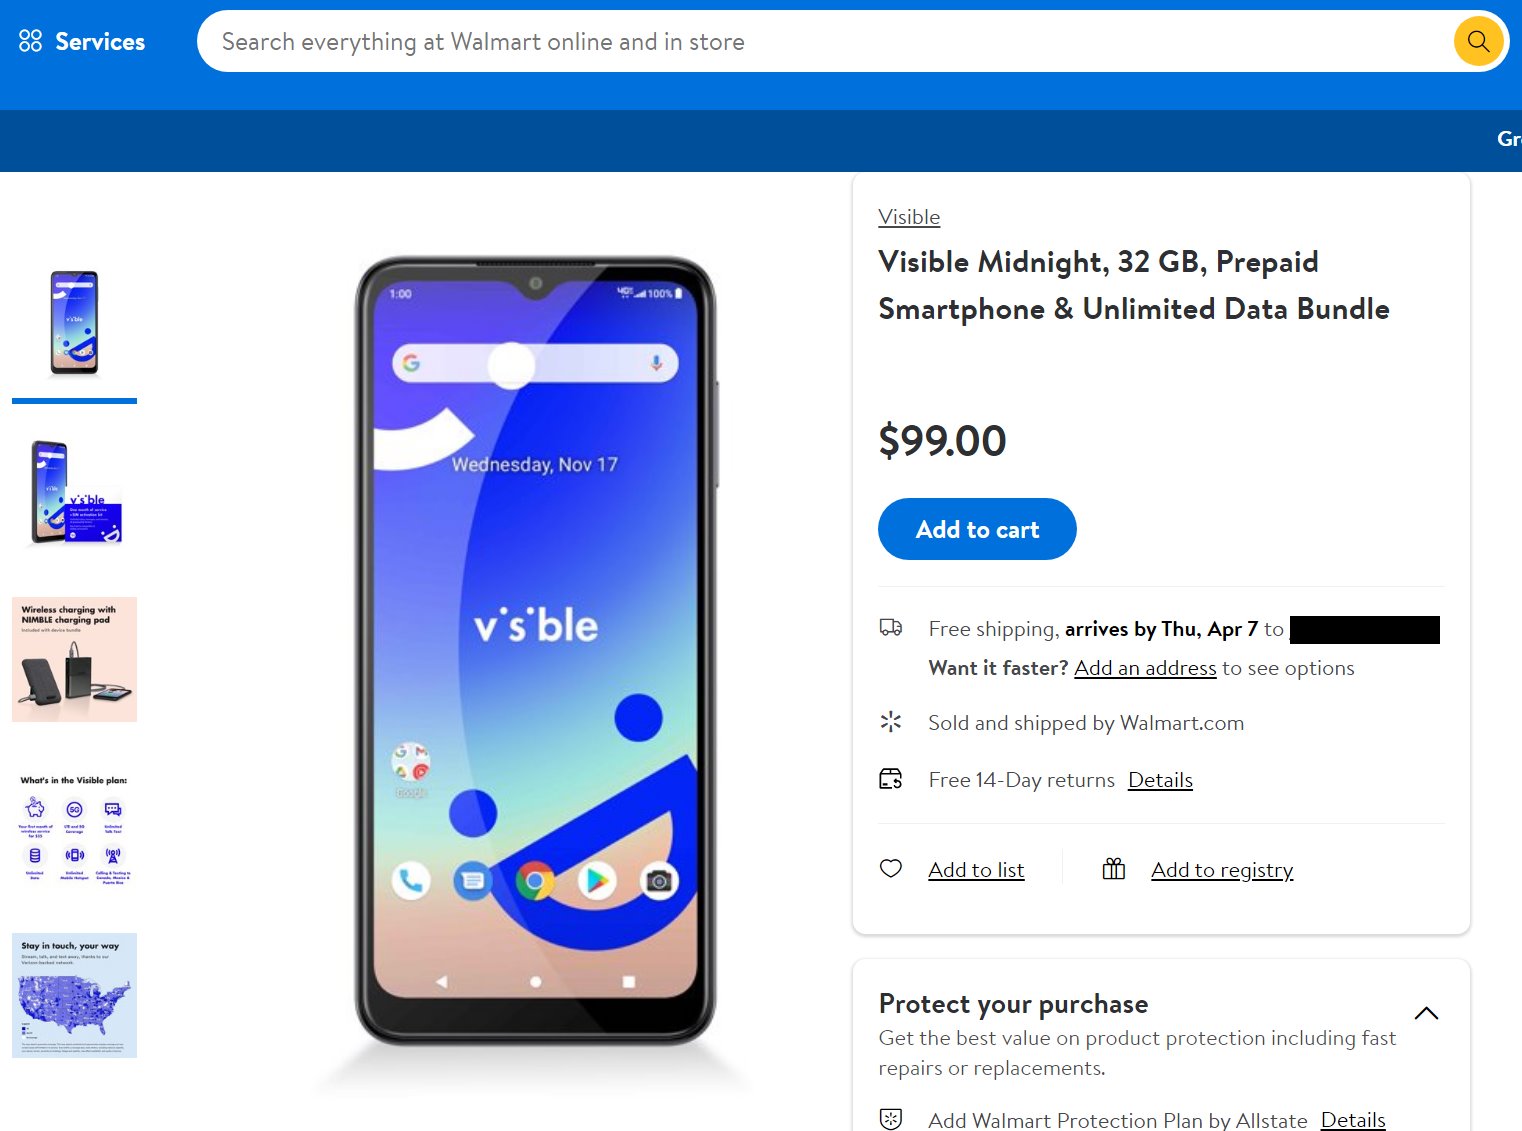 Visible Midnight Phone And Plan Bundle Now Available At Walmart.com